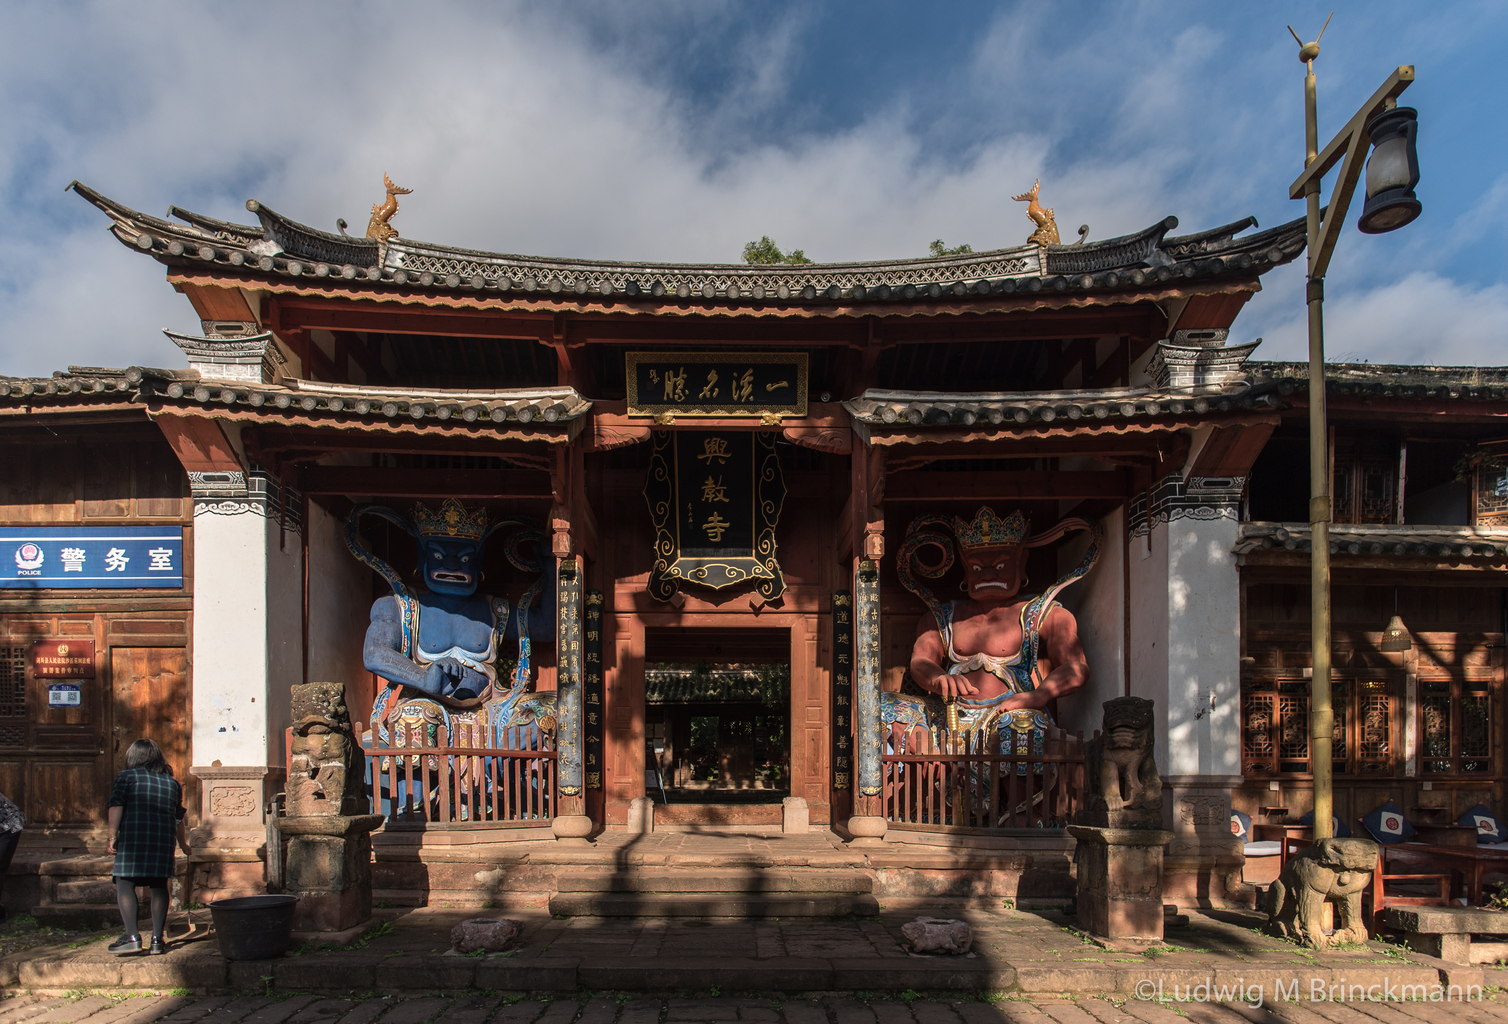 Picture: Shaxi's Xingjiao Temple is one of the oldest temples in Yunnan surviving.